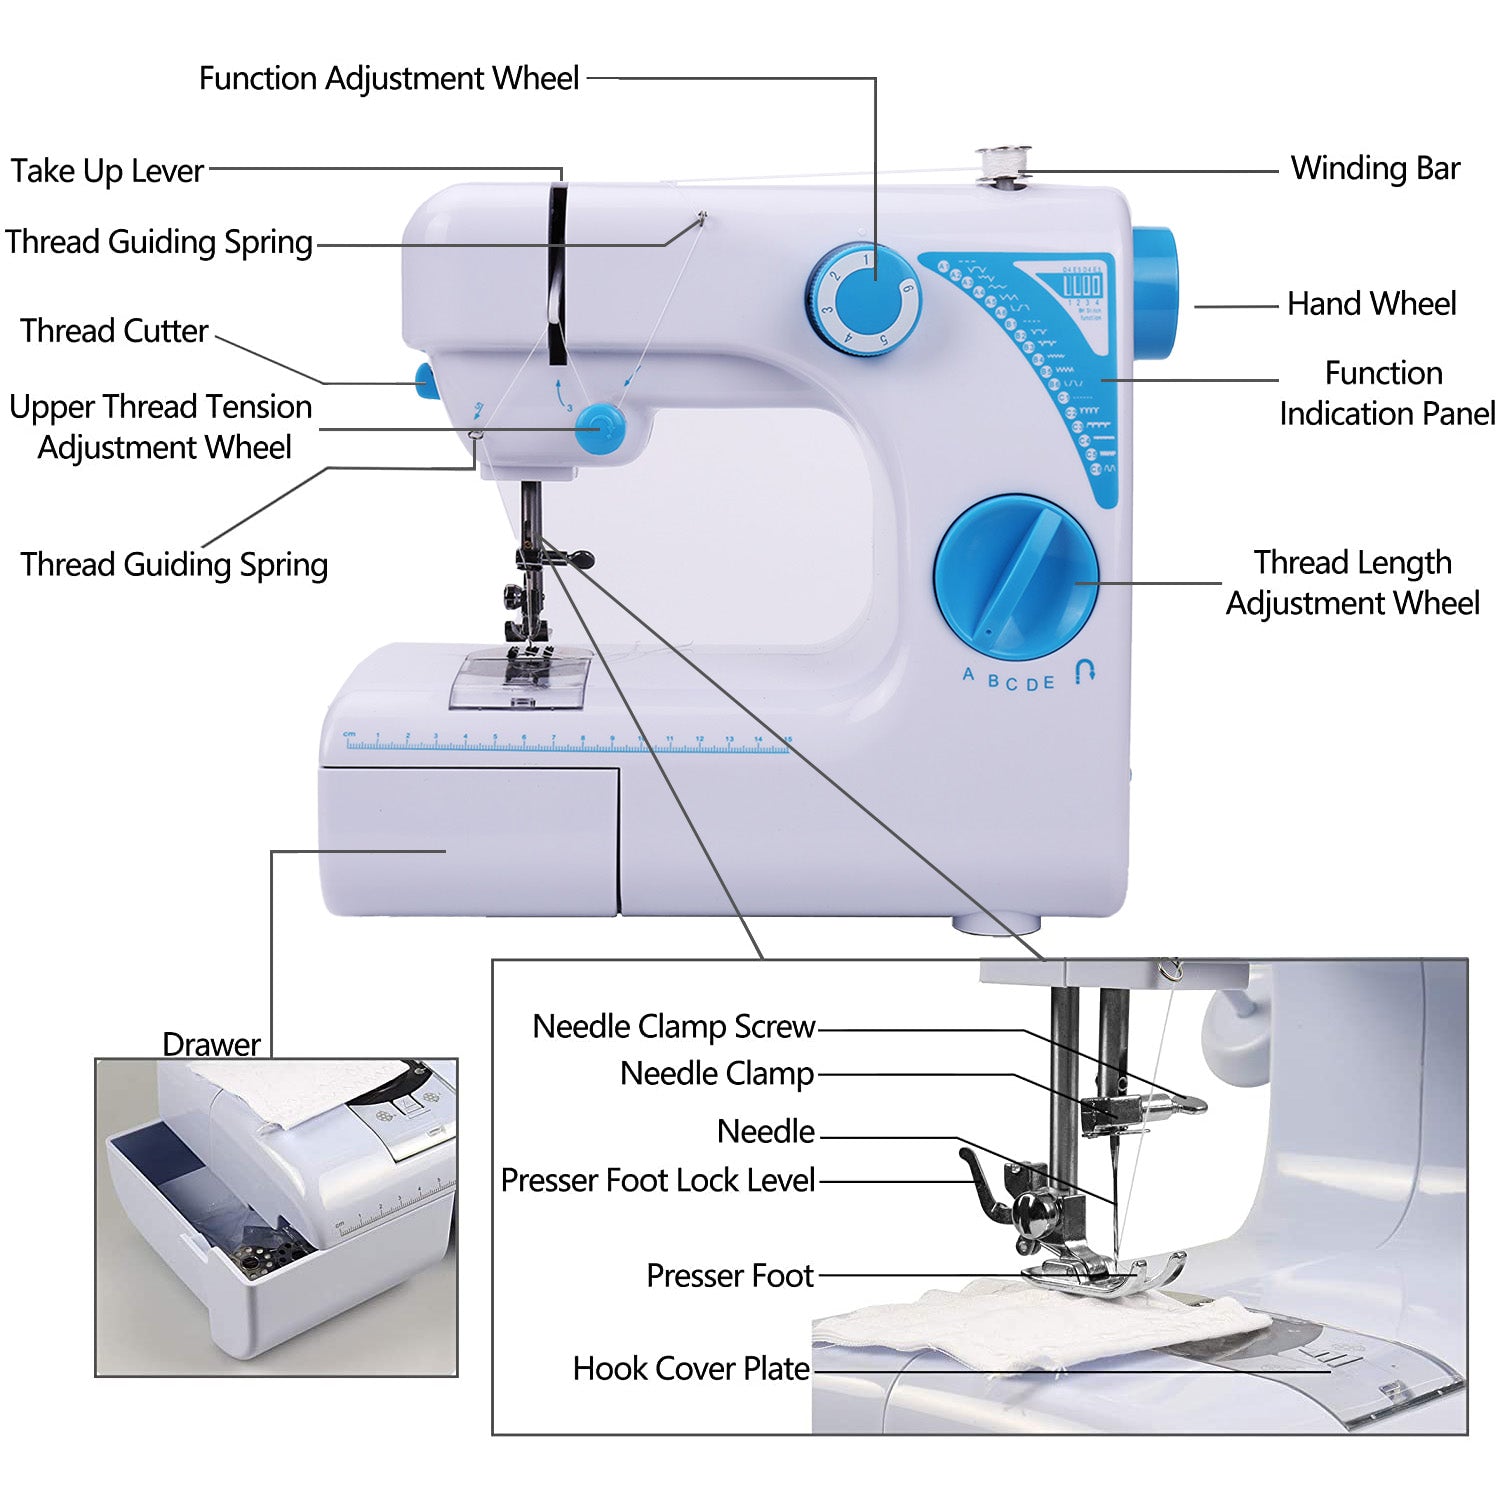 SKONYON Sewing Machine, Electric Handheld Crafting Mending Mini Machines,19 Stitches 2 Speeds With Foot Pedal for Home